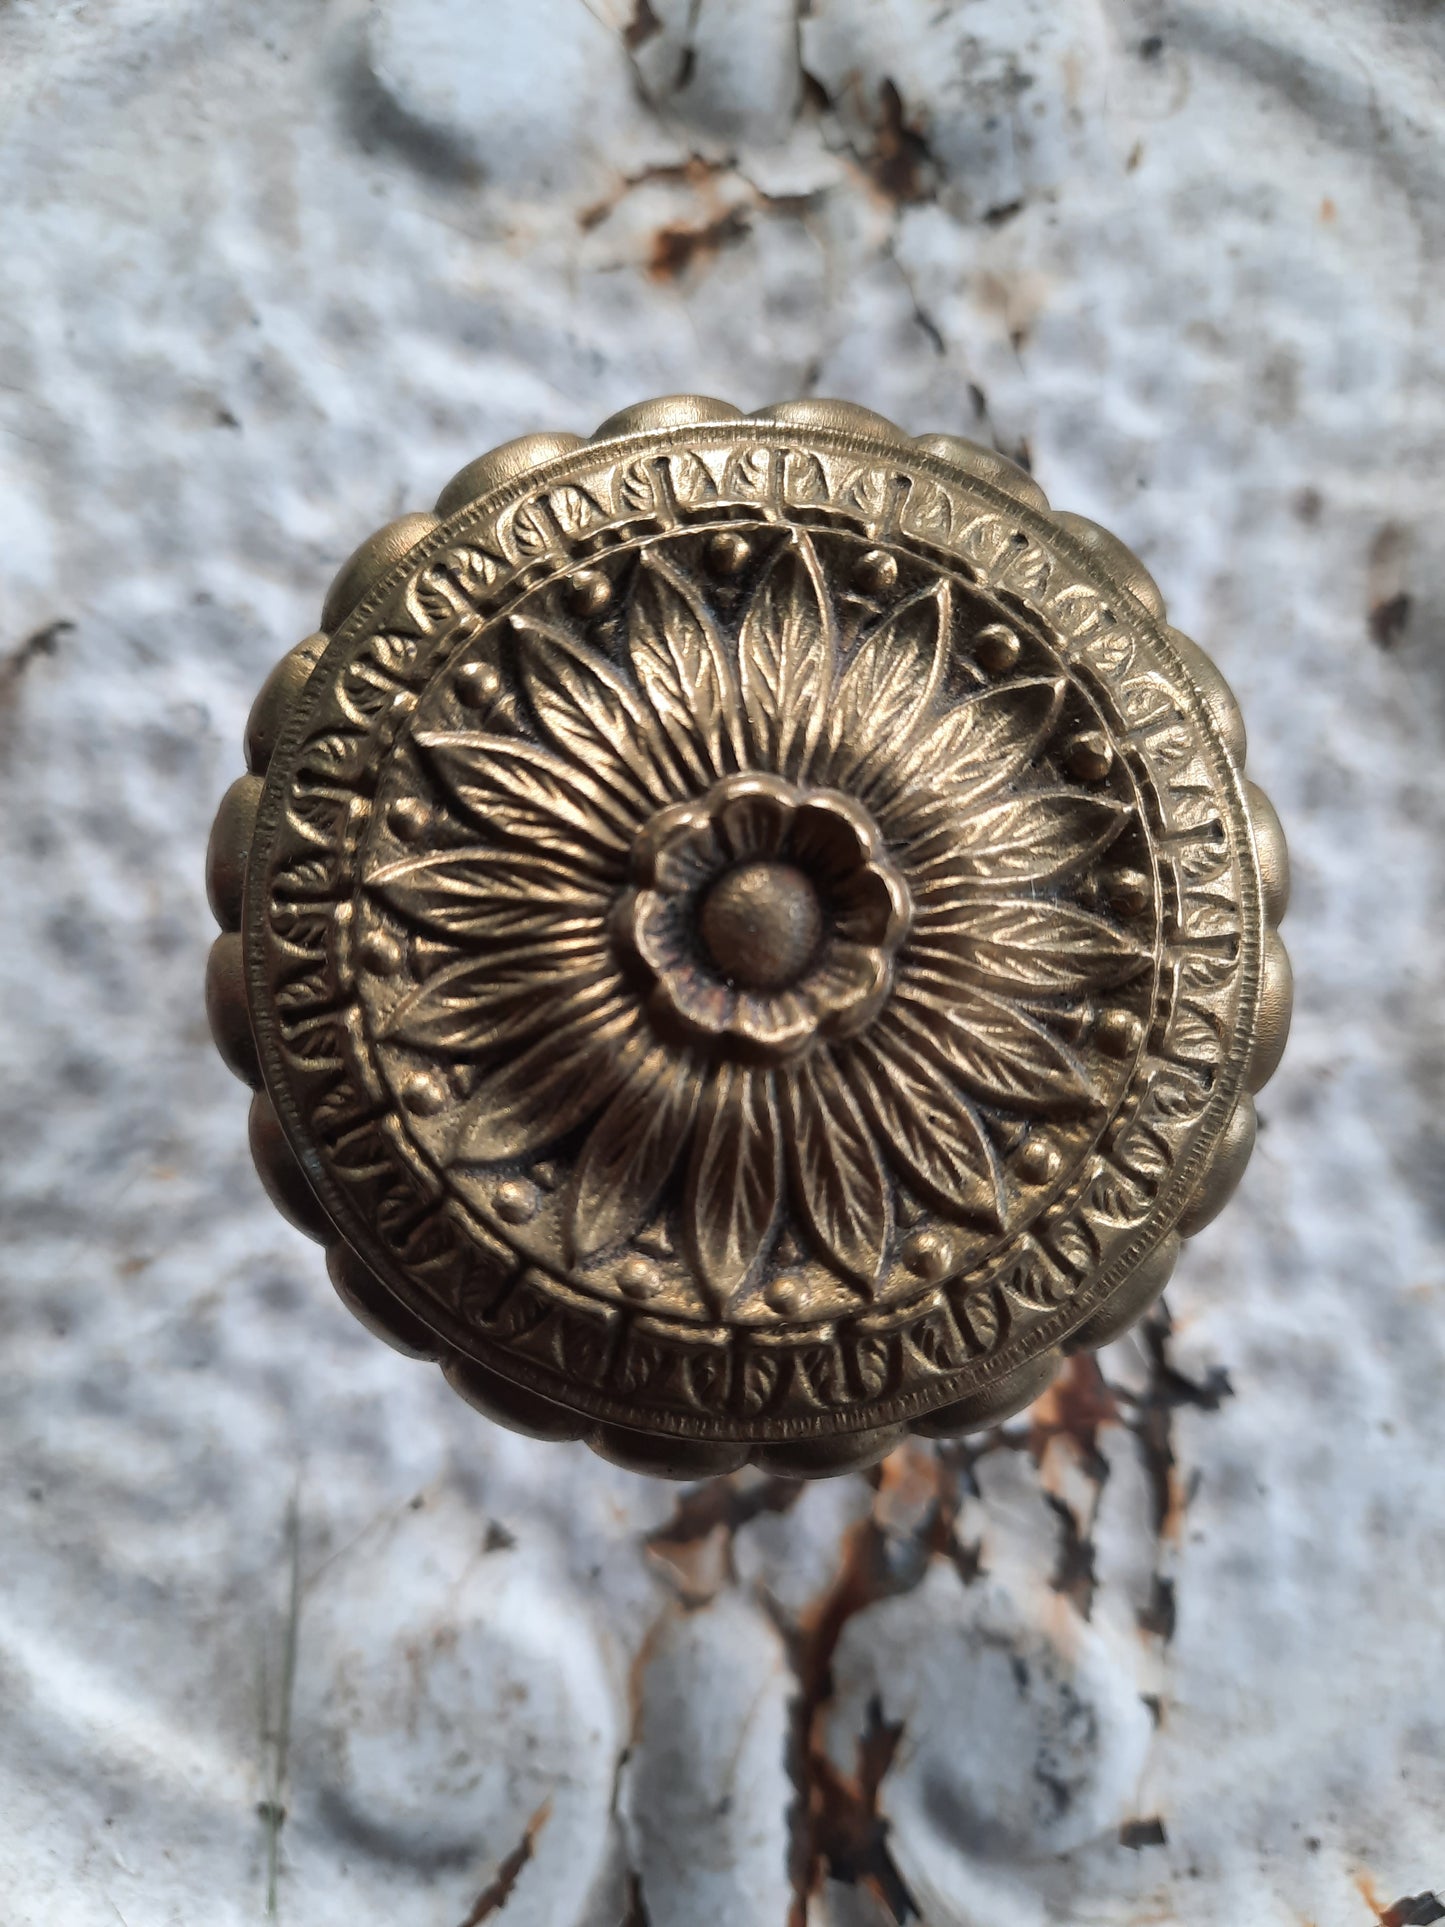 Entry Sized "Marsala" Doorknob by Reading, Large Solid Bronze Antique Entry Doorknob